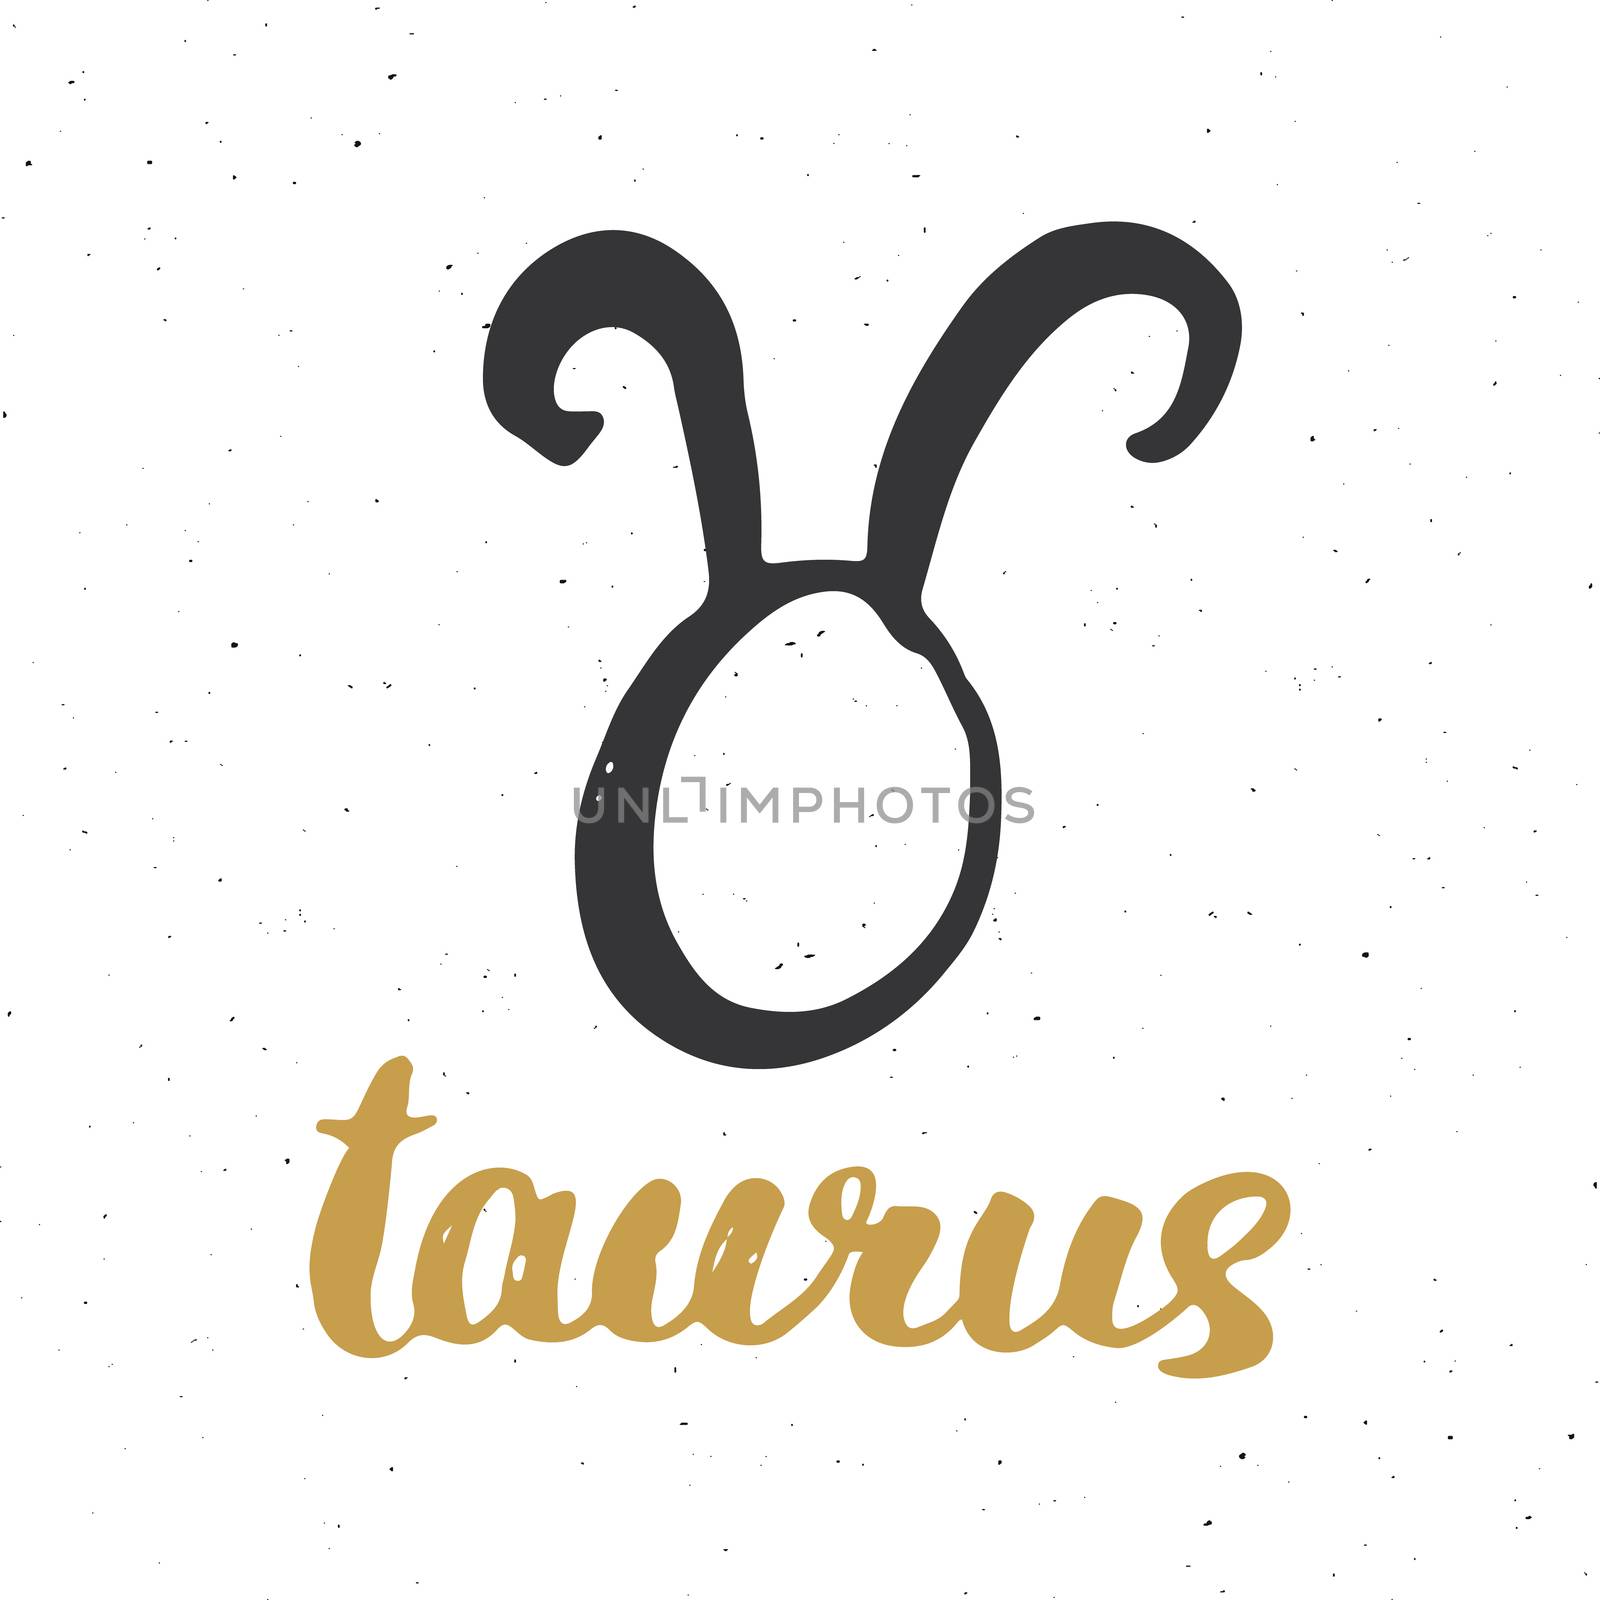 Zodiac sign Taurus and lettering. Hand drawn horoscope astrology symbol, grunge textured design, typography print, vector illustration .